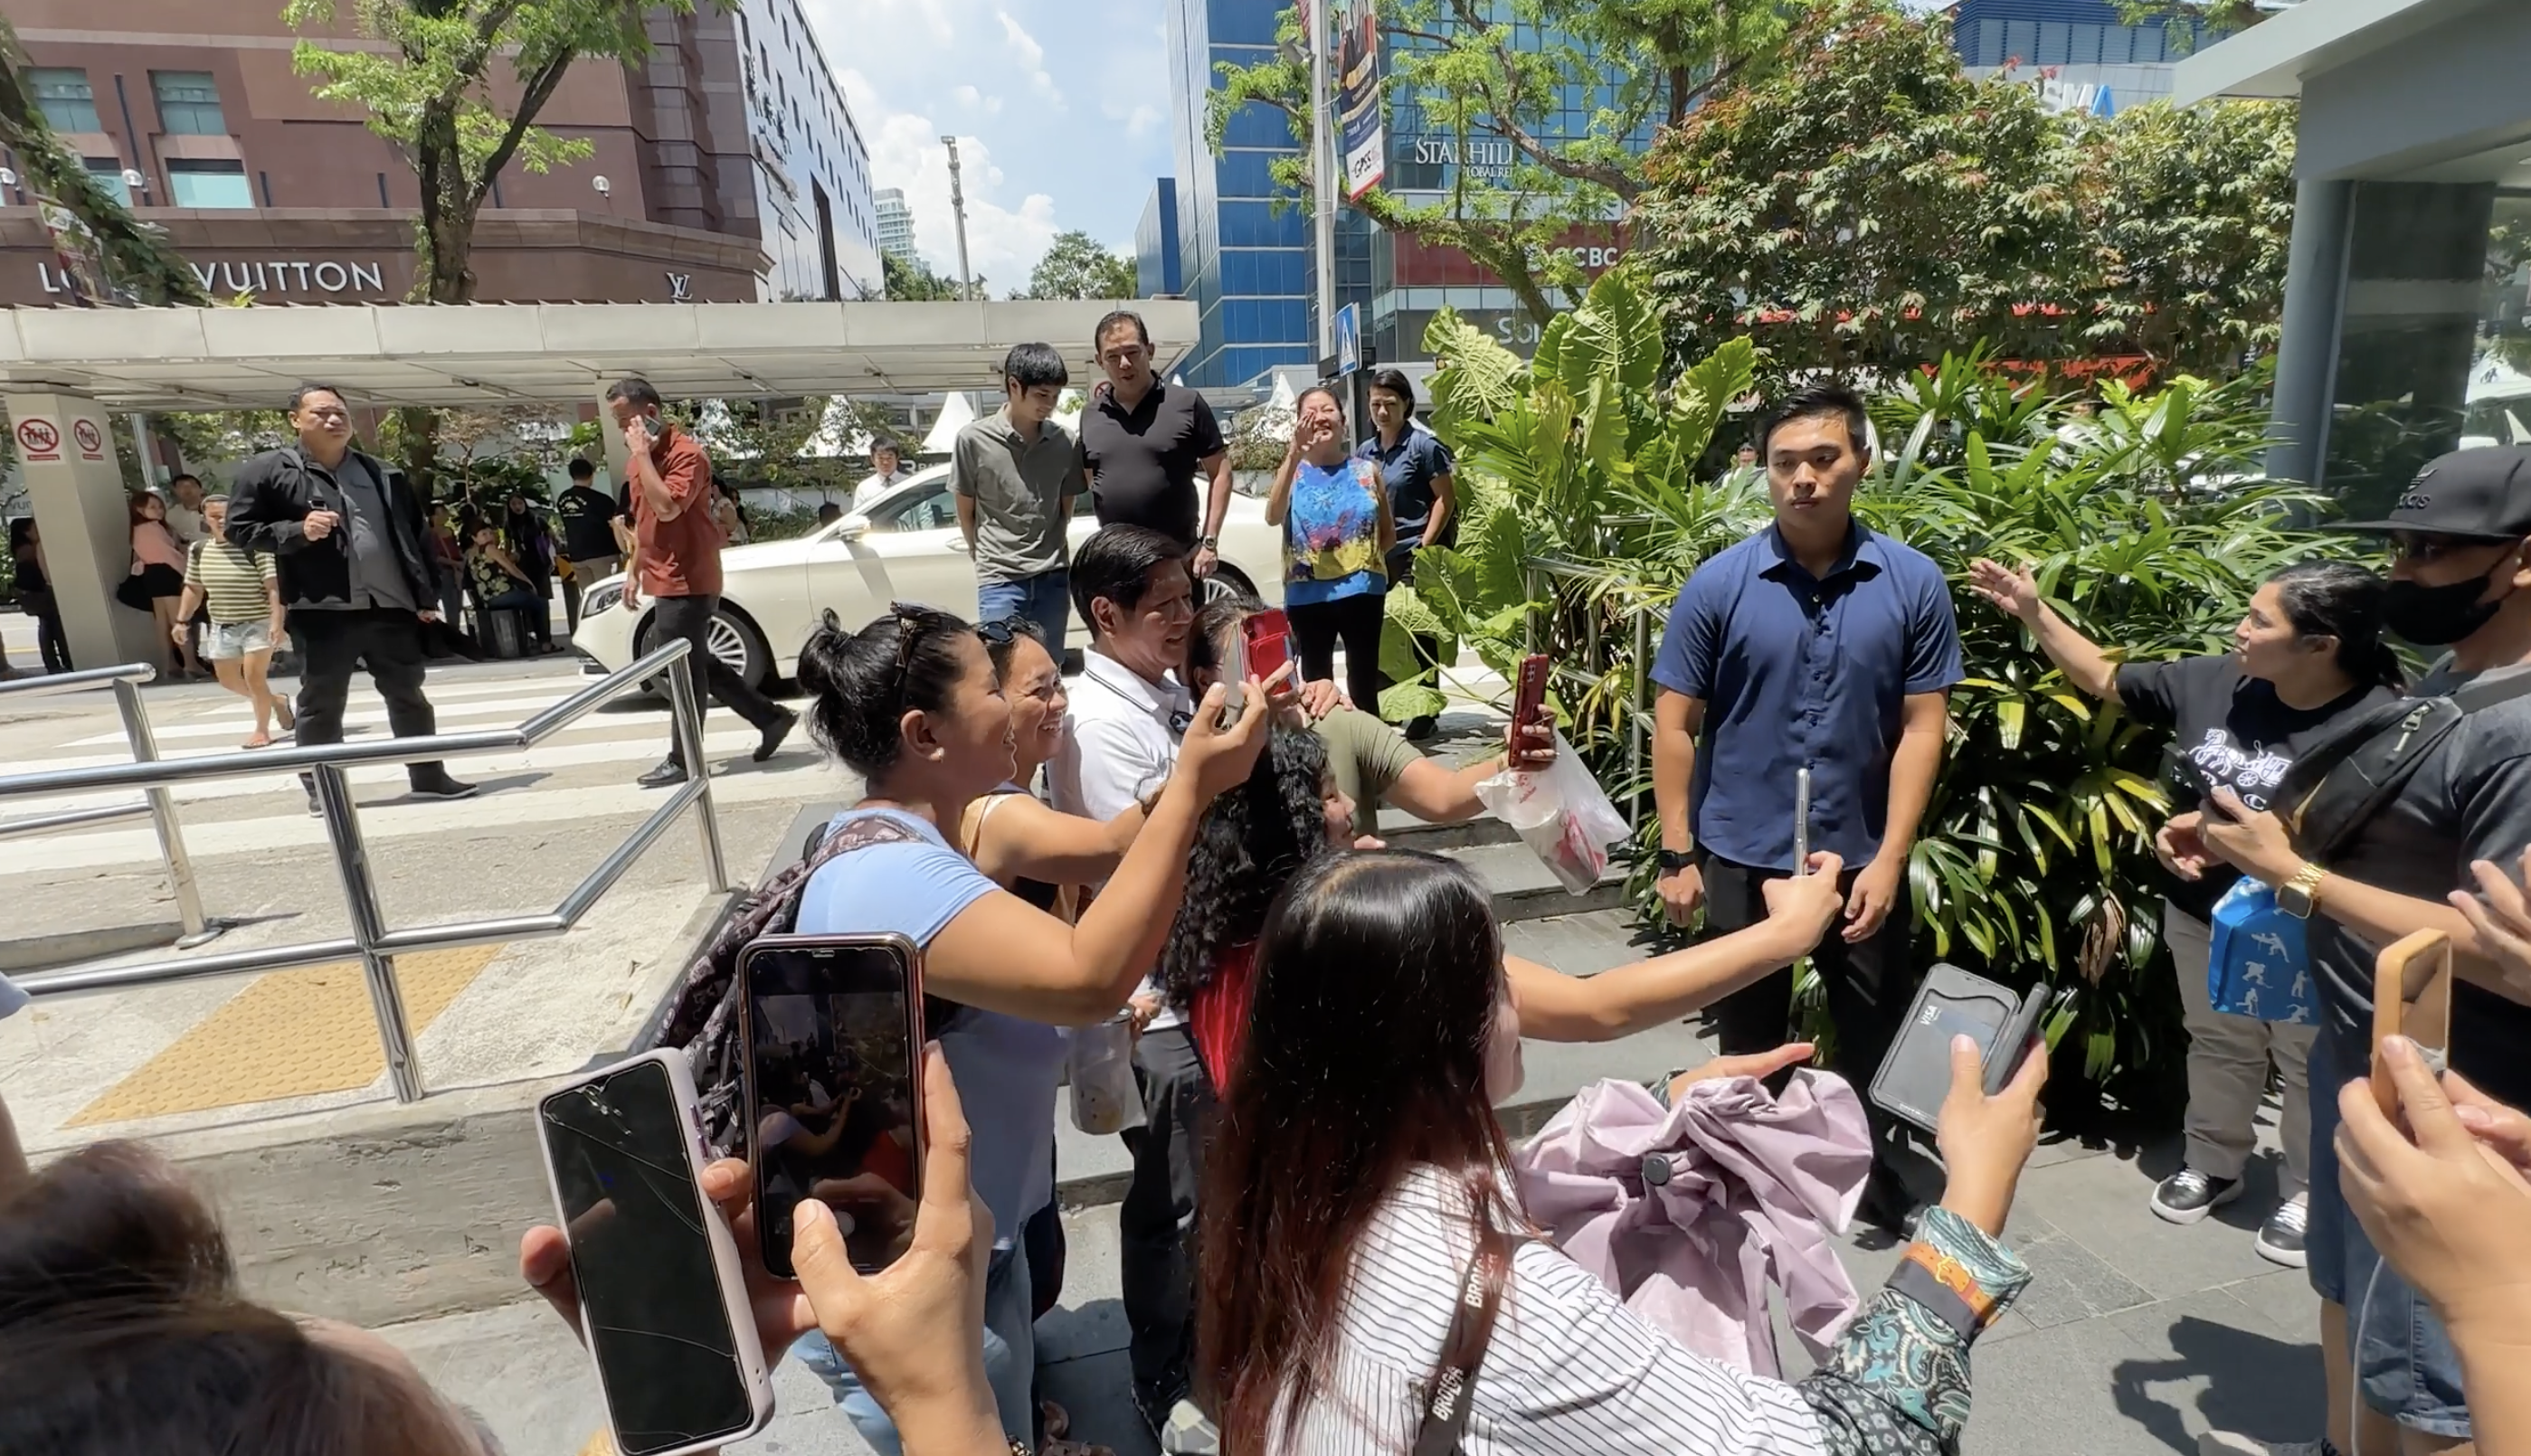 A crowd of Overseas Filipino workers (OFWs) welcomed and swarmed President Ferdinand Marcos Jr. on Sunday after he made a surprise appearance at a mall in Singapore as part of his official visit to the country.